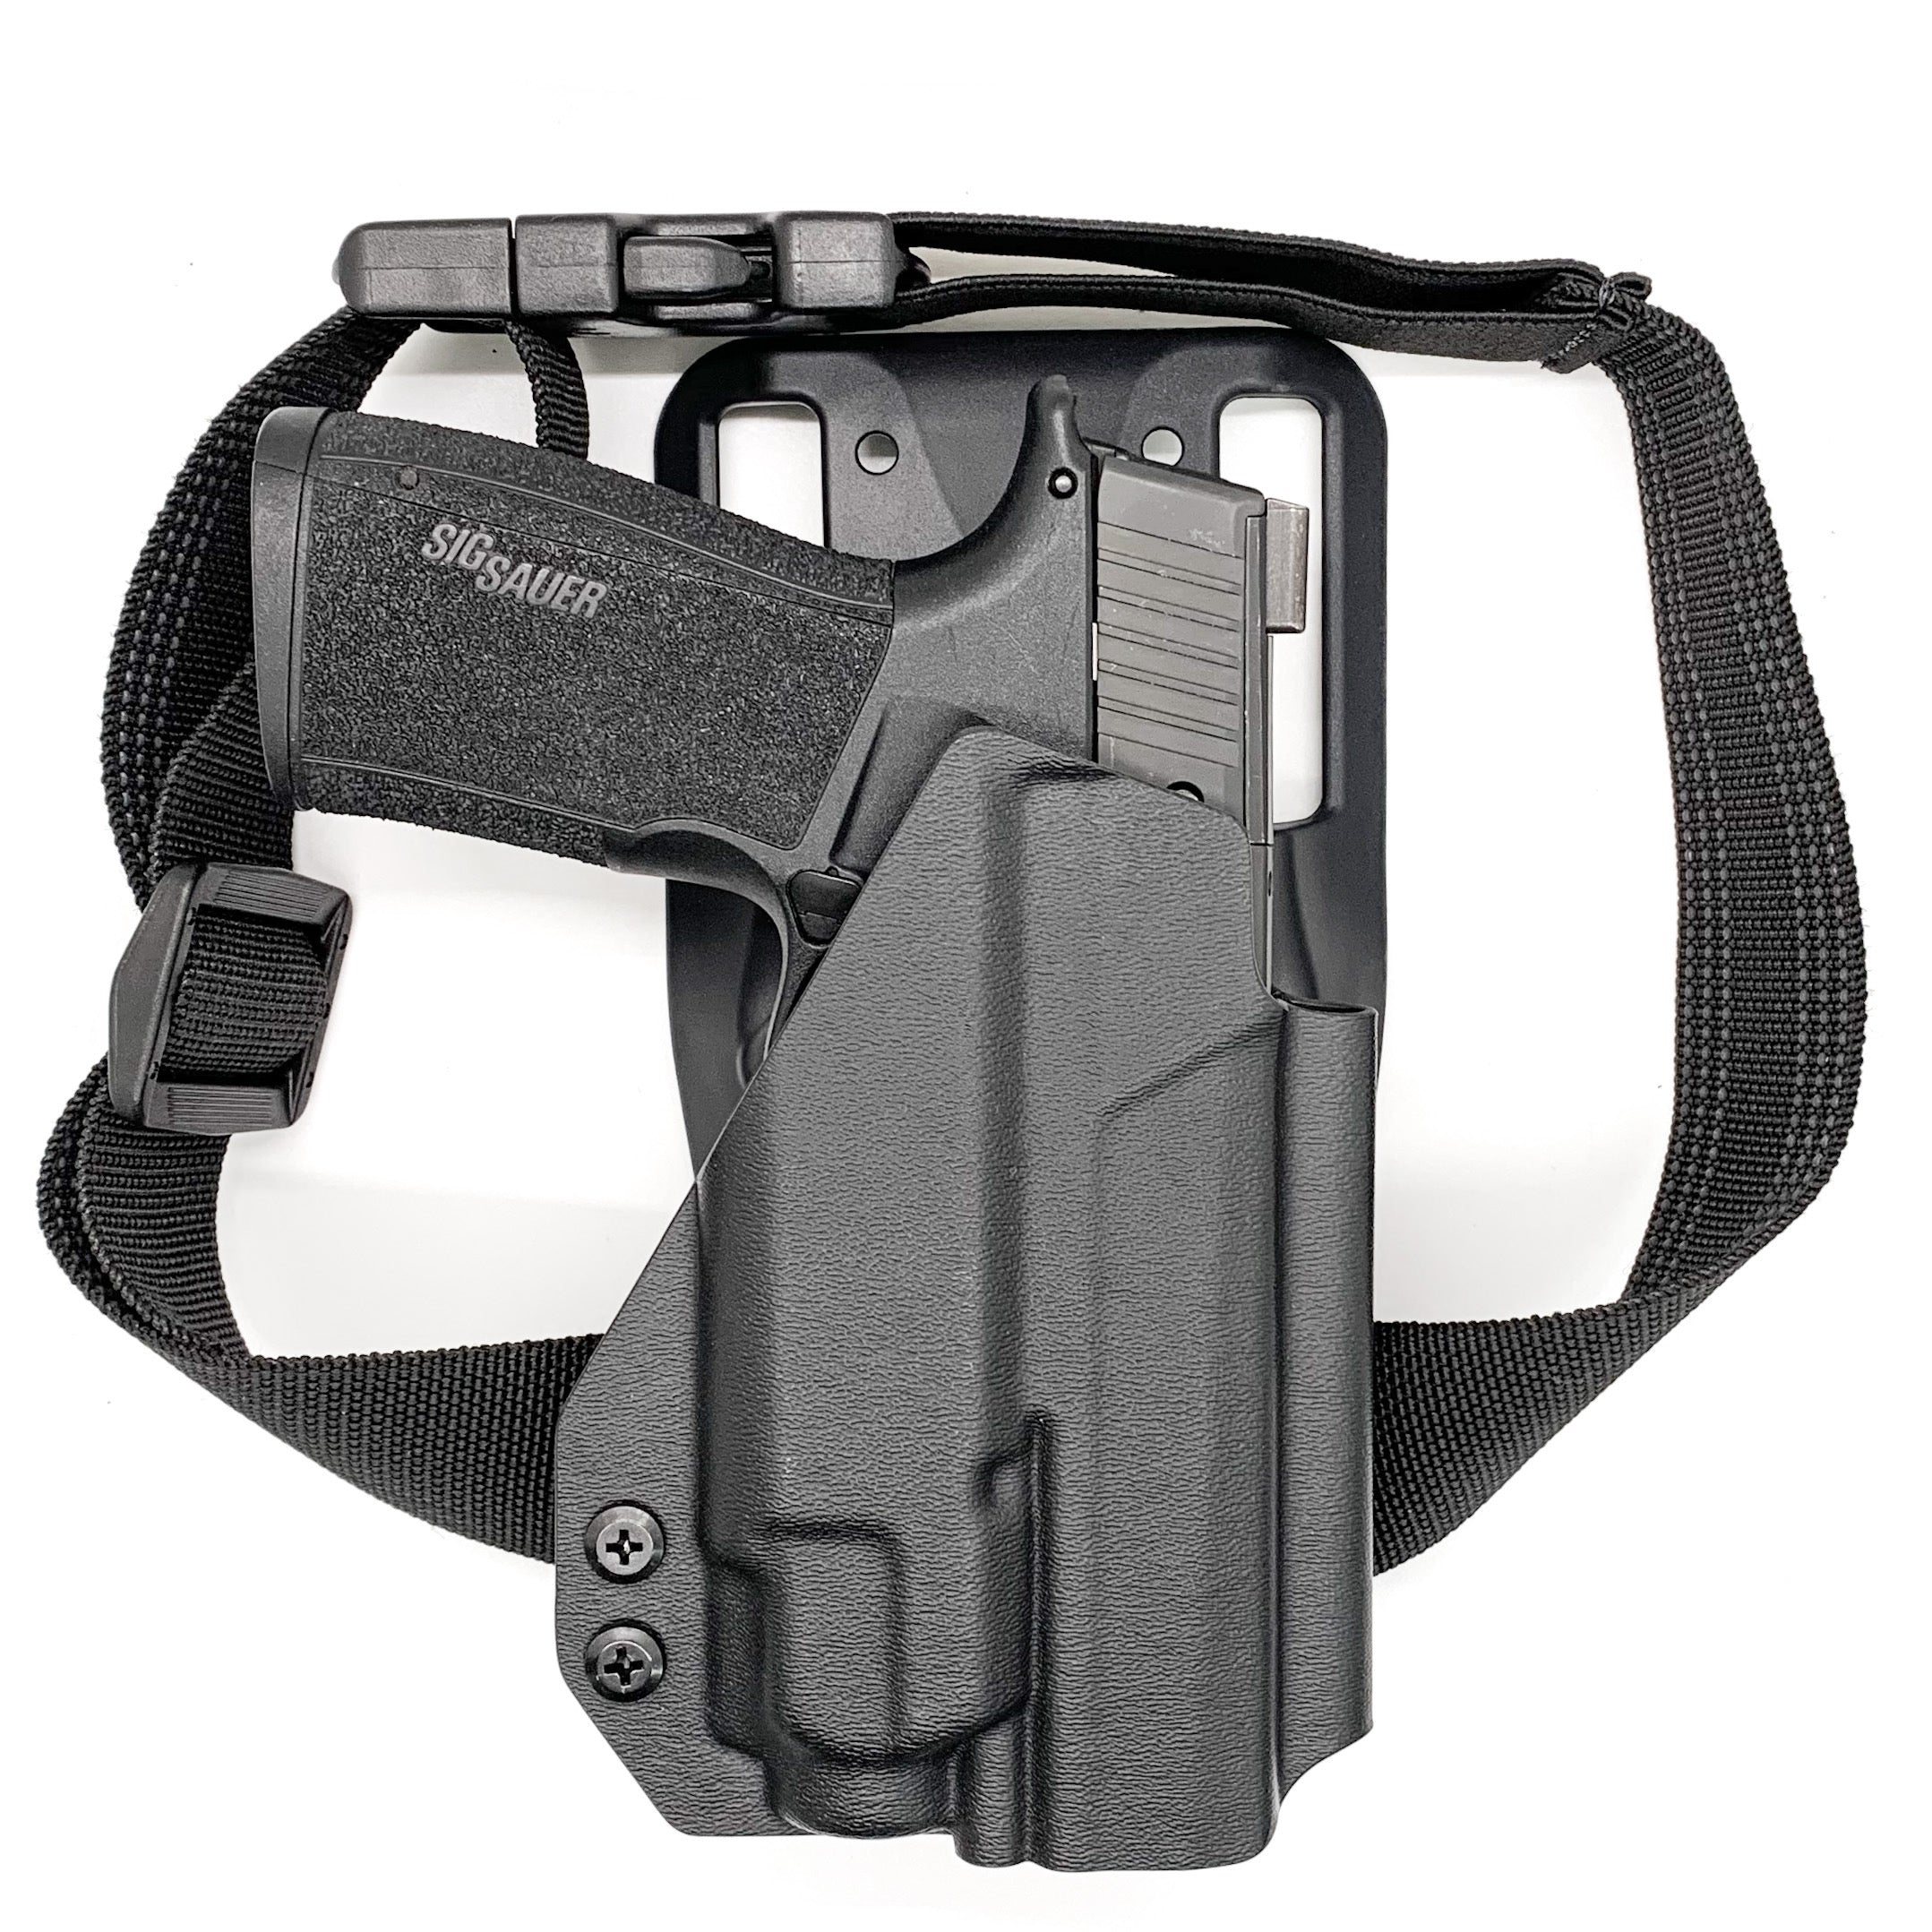 For the best Outside Waistband Duty & Competition Kydex Holster designed for the Sig Sauer P365-XMACRO with Streamlight TLR-8 Sub, shop Four Brothers Holsters.  Full sweat guard, adjustable retention, minimal material & smooth edges to reduce printing, open muzzle, cleared for red dot sights. Made in the USA. 